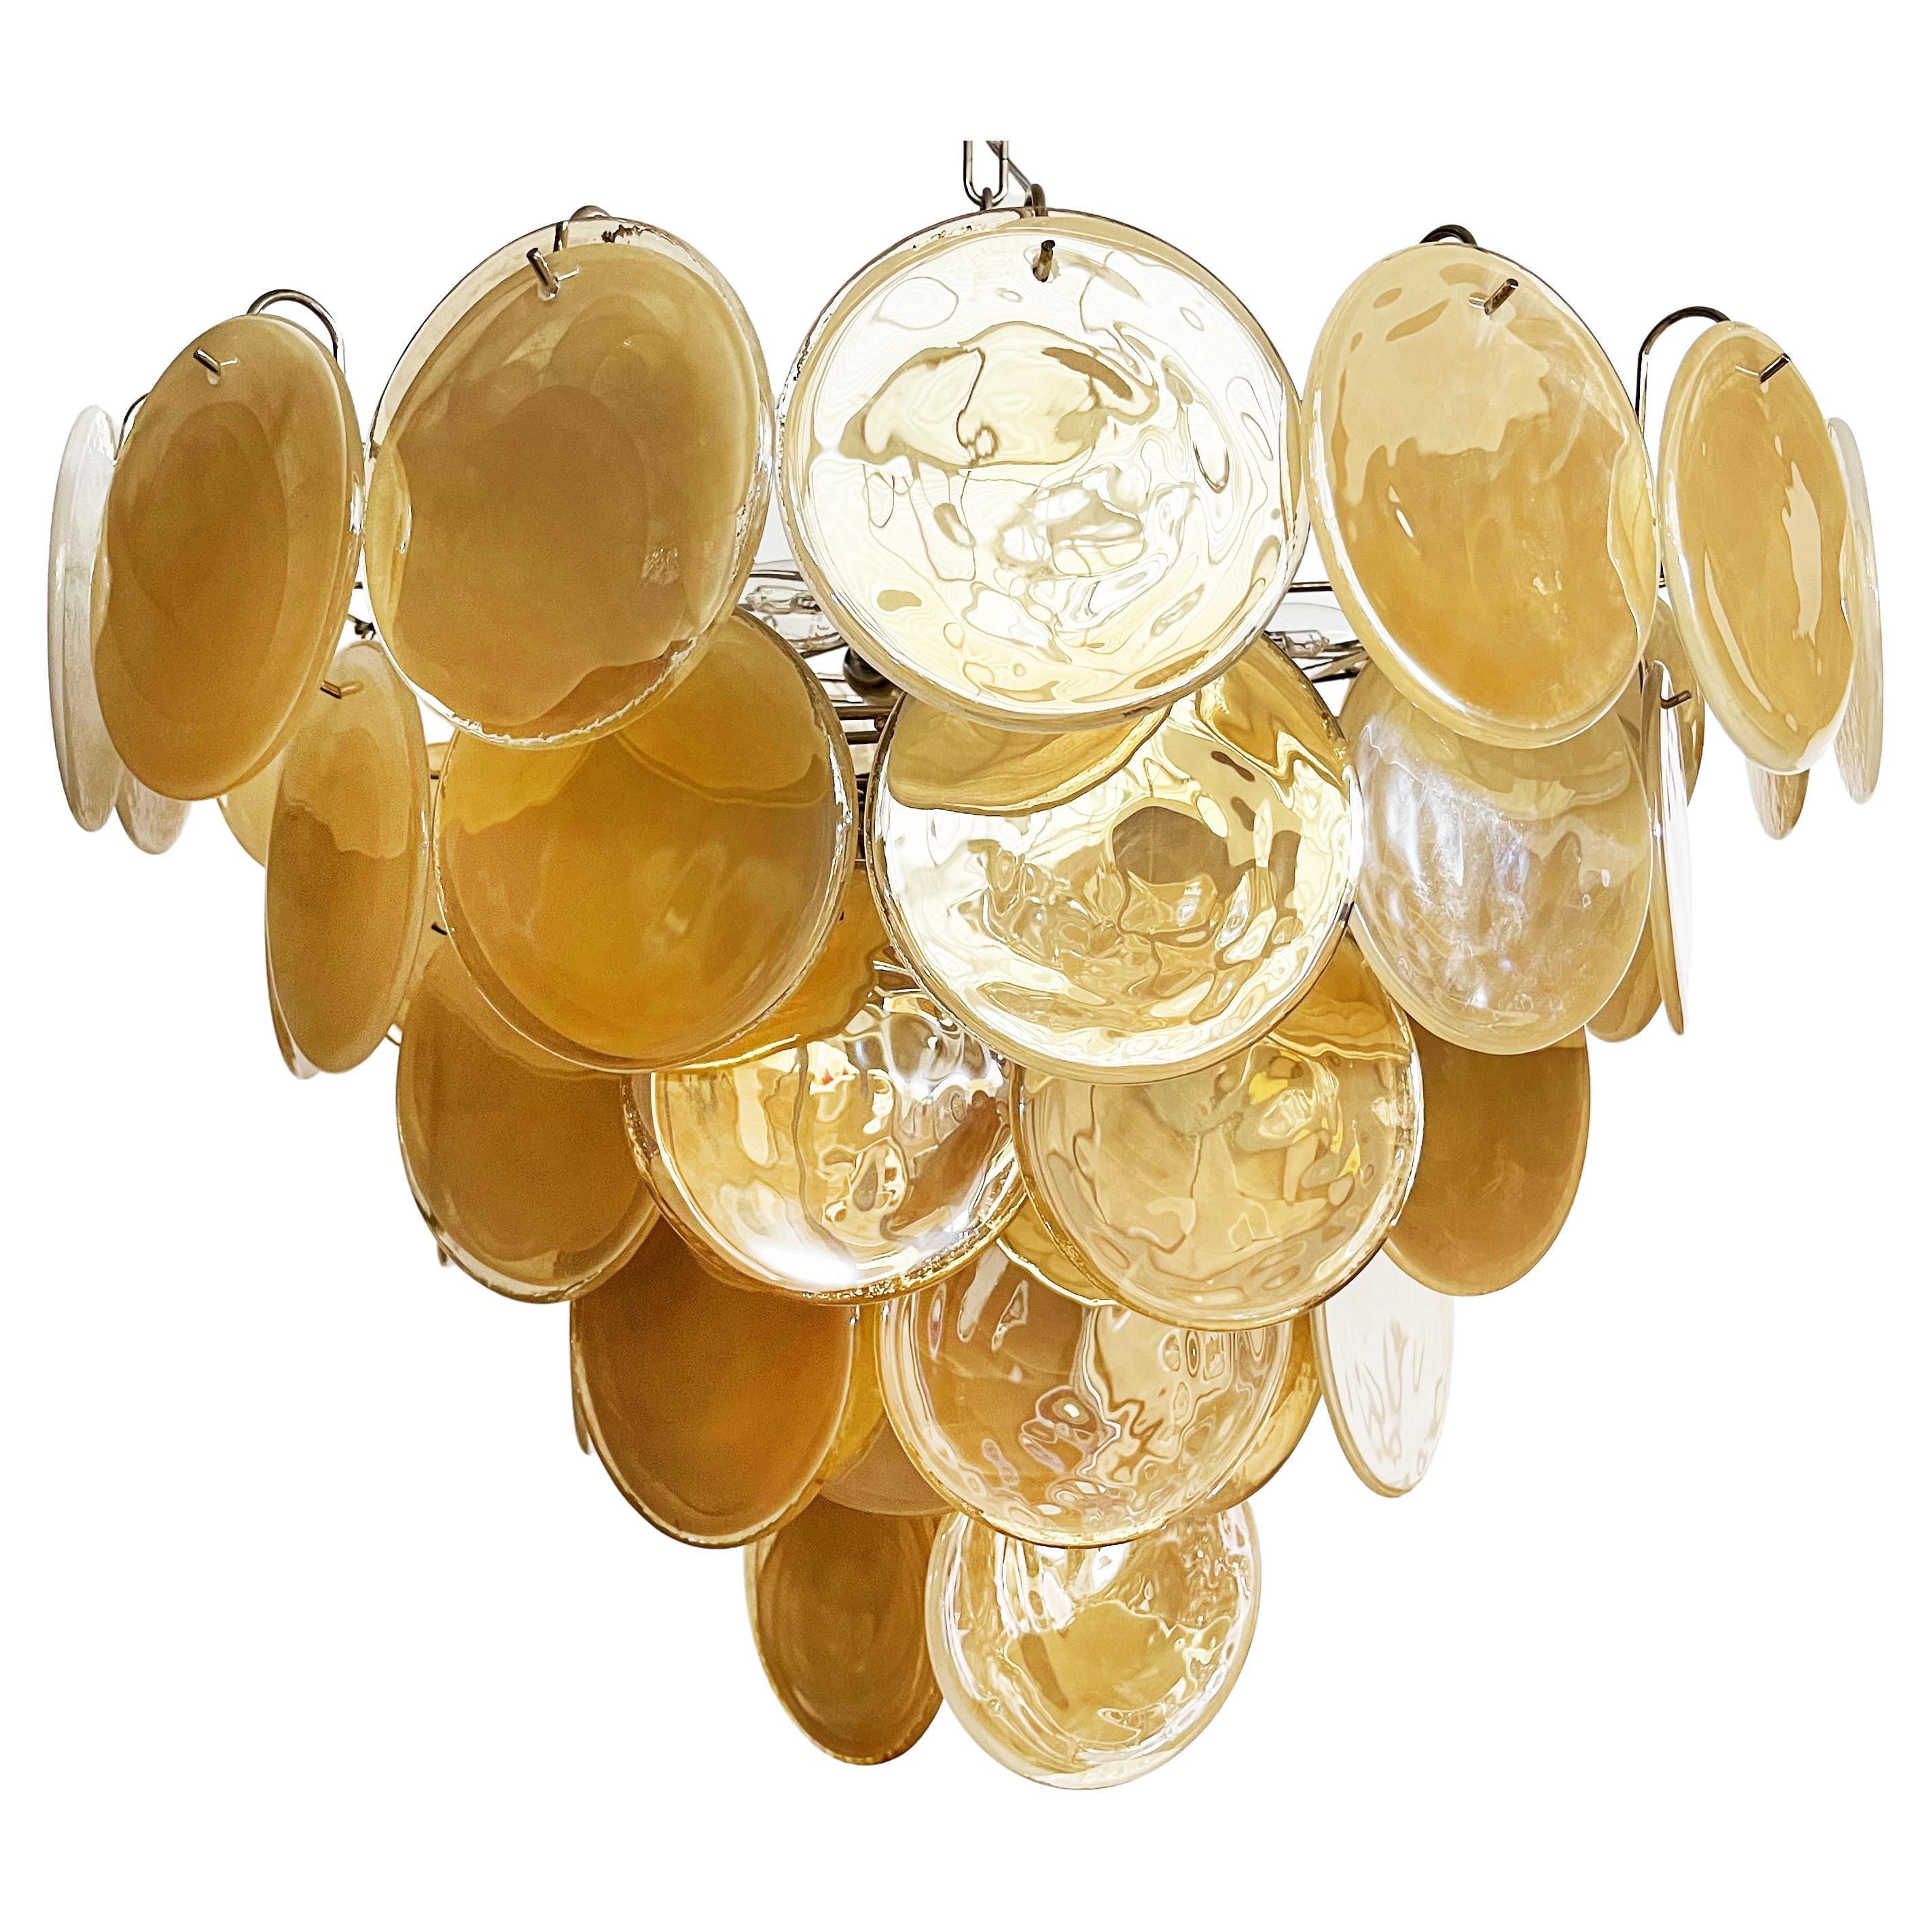 Gorgeous Murano chandelier space age - 57 gold alabaster iridescent glasses For Sale